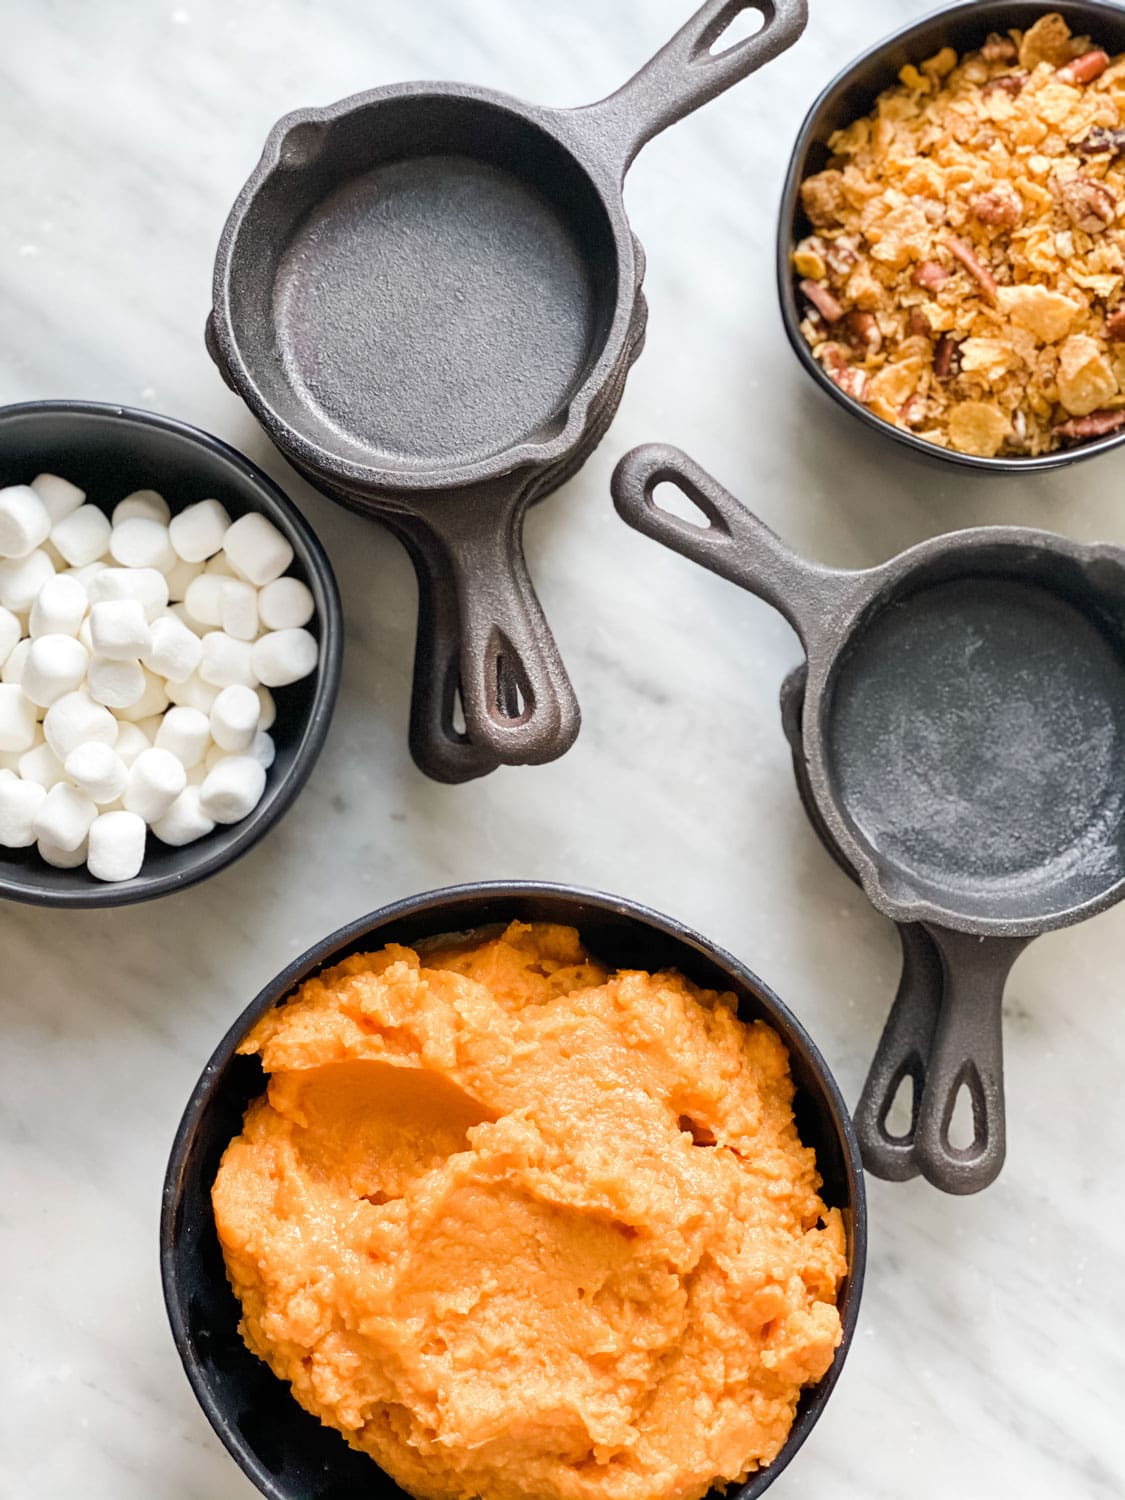 small bowls with sweet potatoes and marshmallows, mini lodge skillets